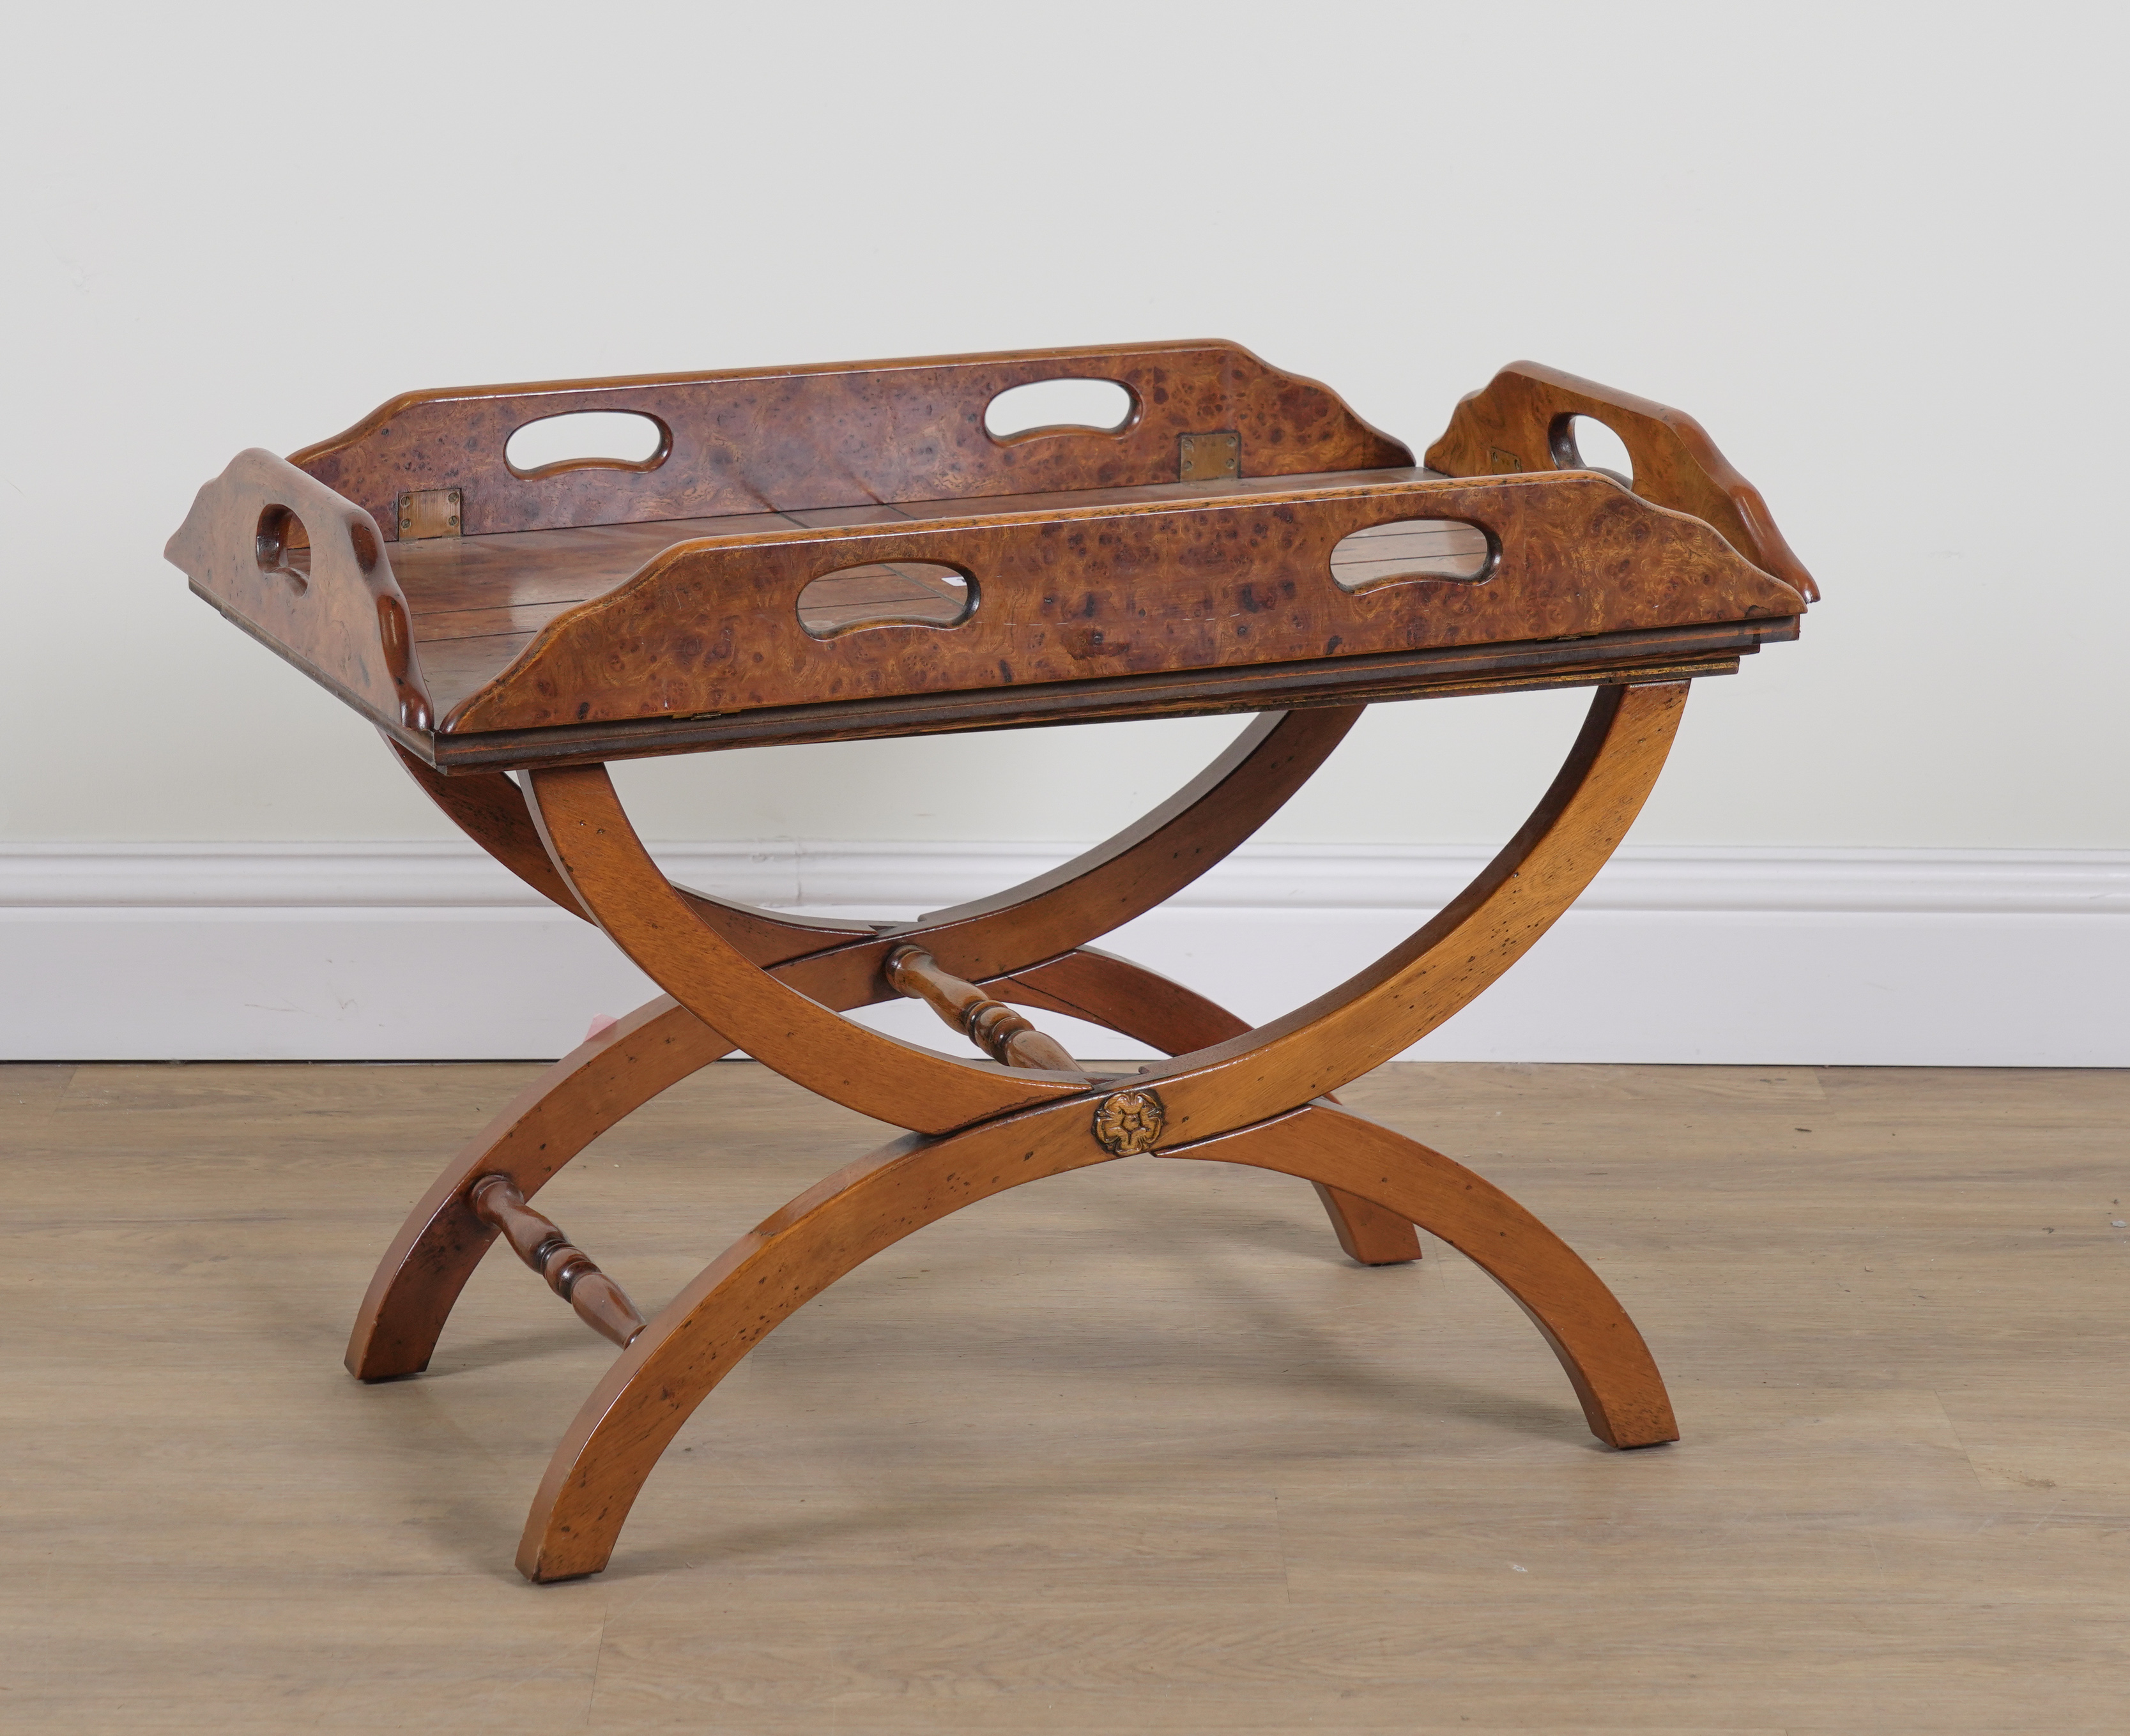 A 19TH CENTURY STYLE POLLARD OAK DROP FLAP BUTLER'S TRAY ON STAND